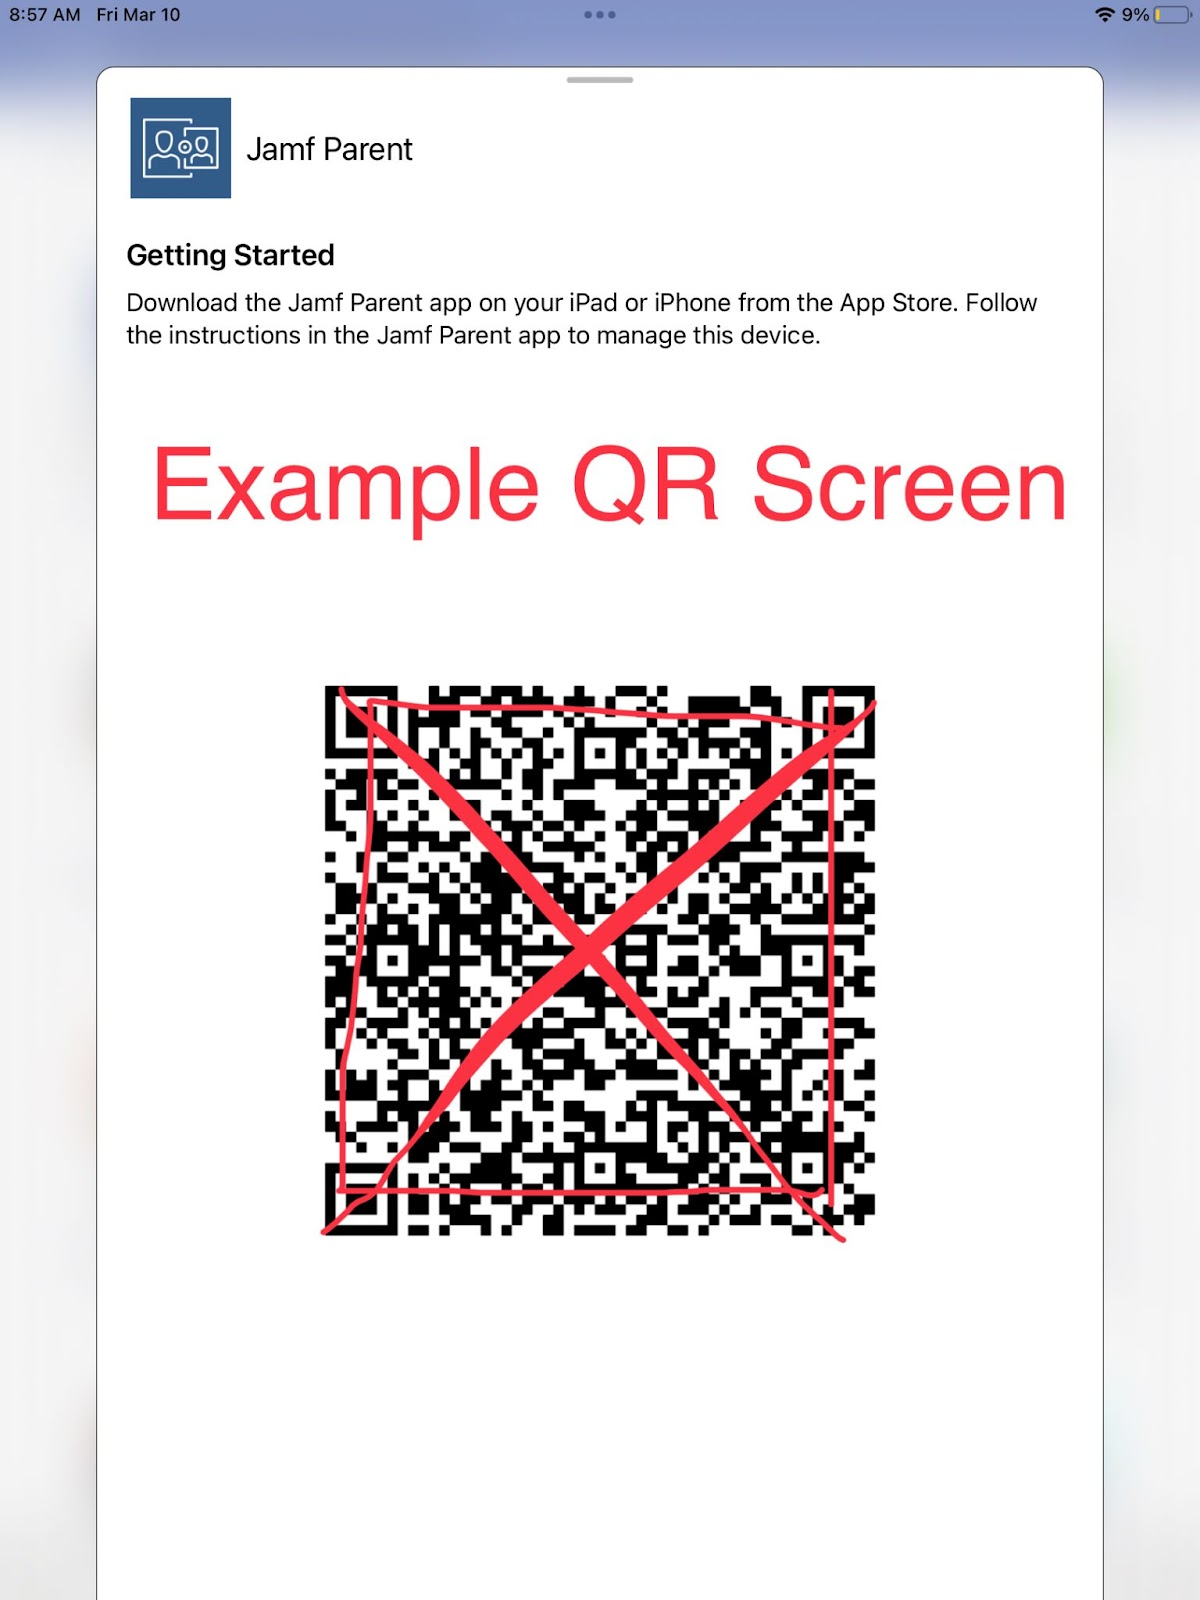 Image is an Example of a QR Code generated by JAMF Parent